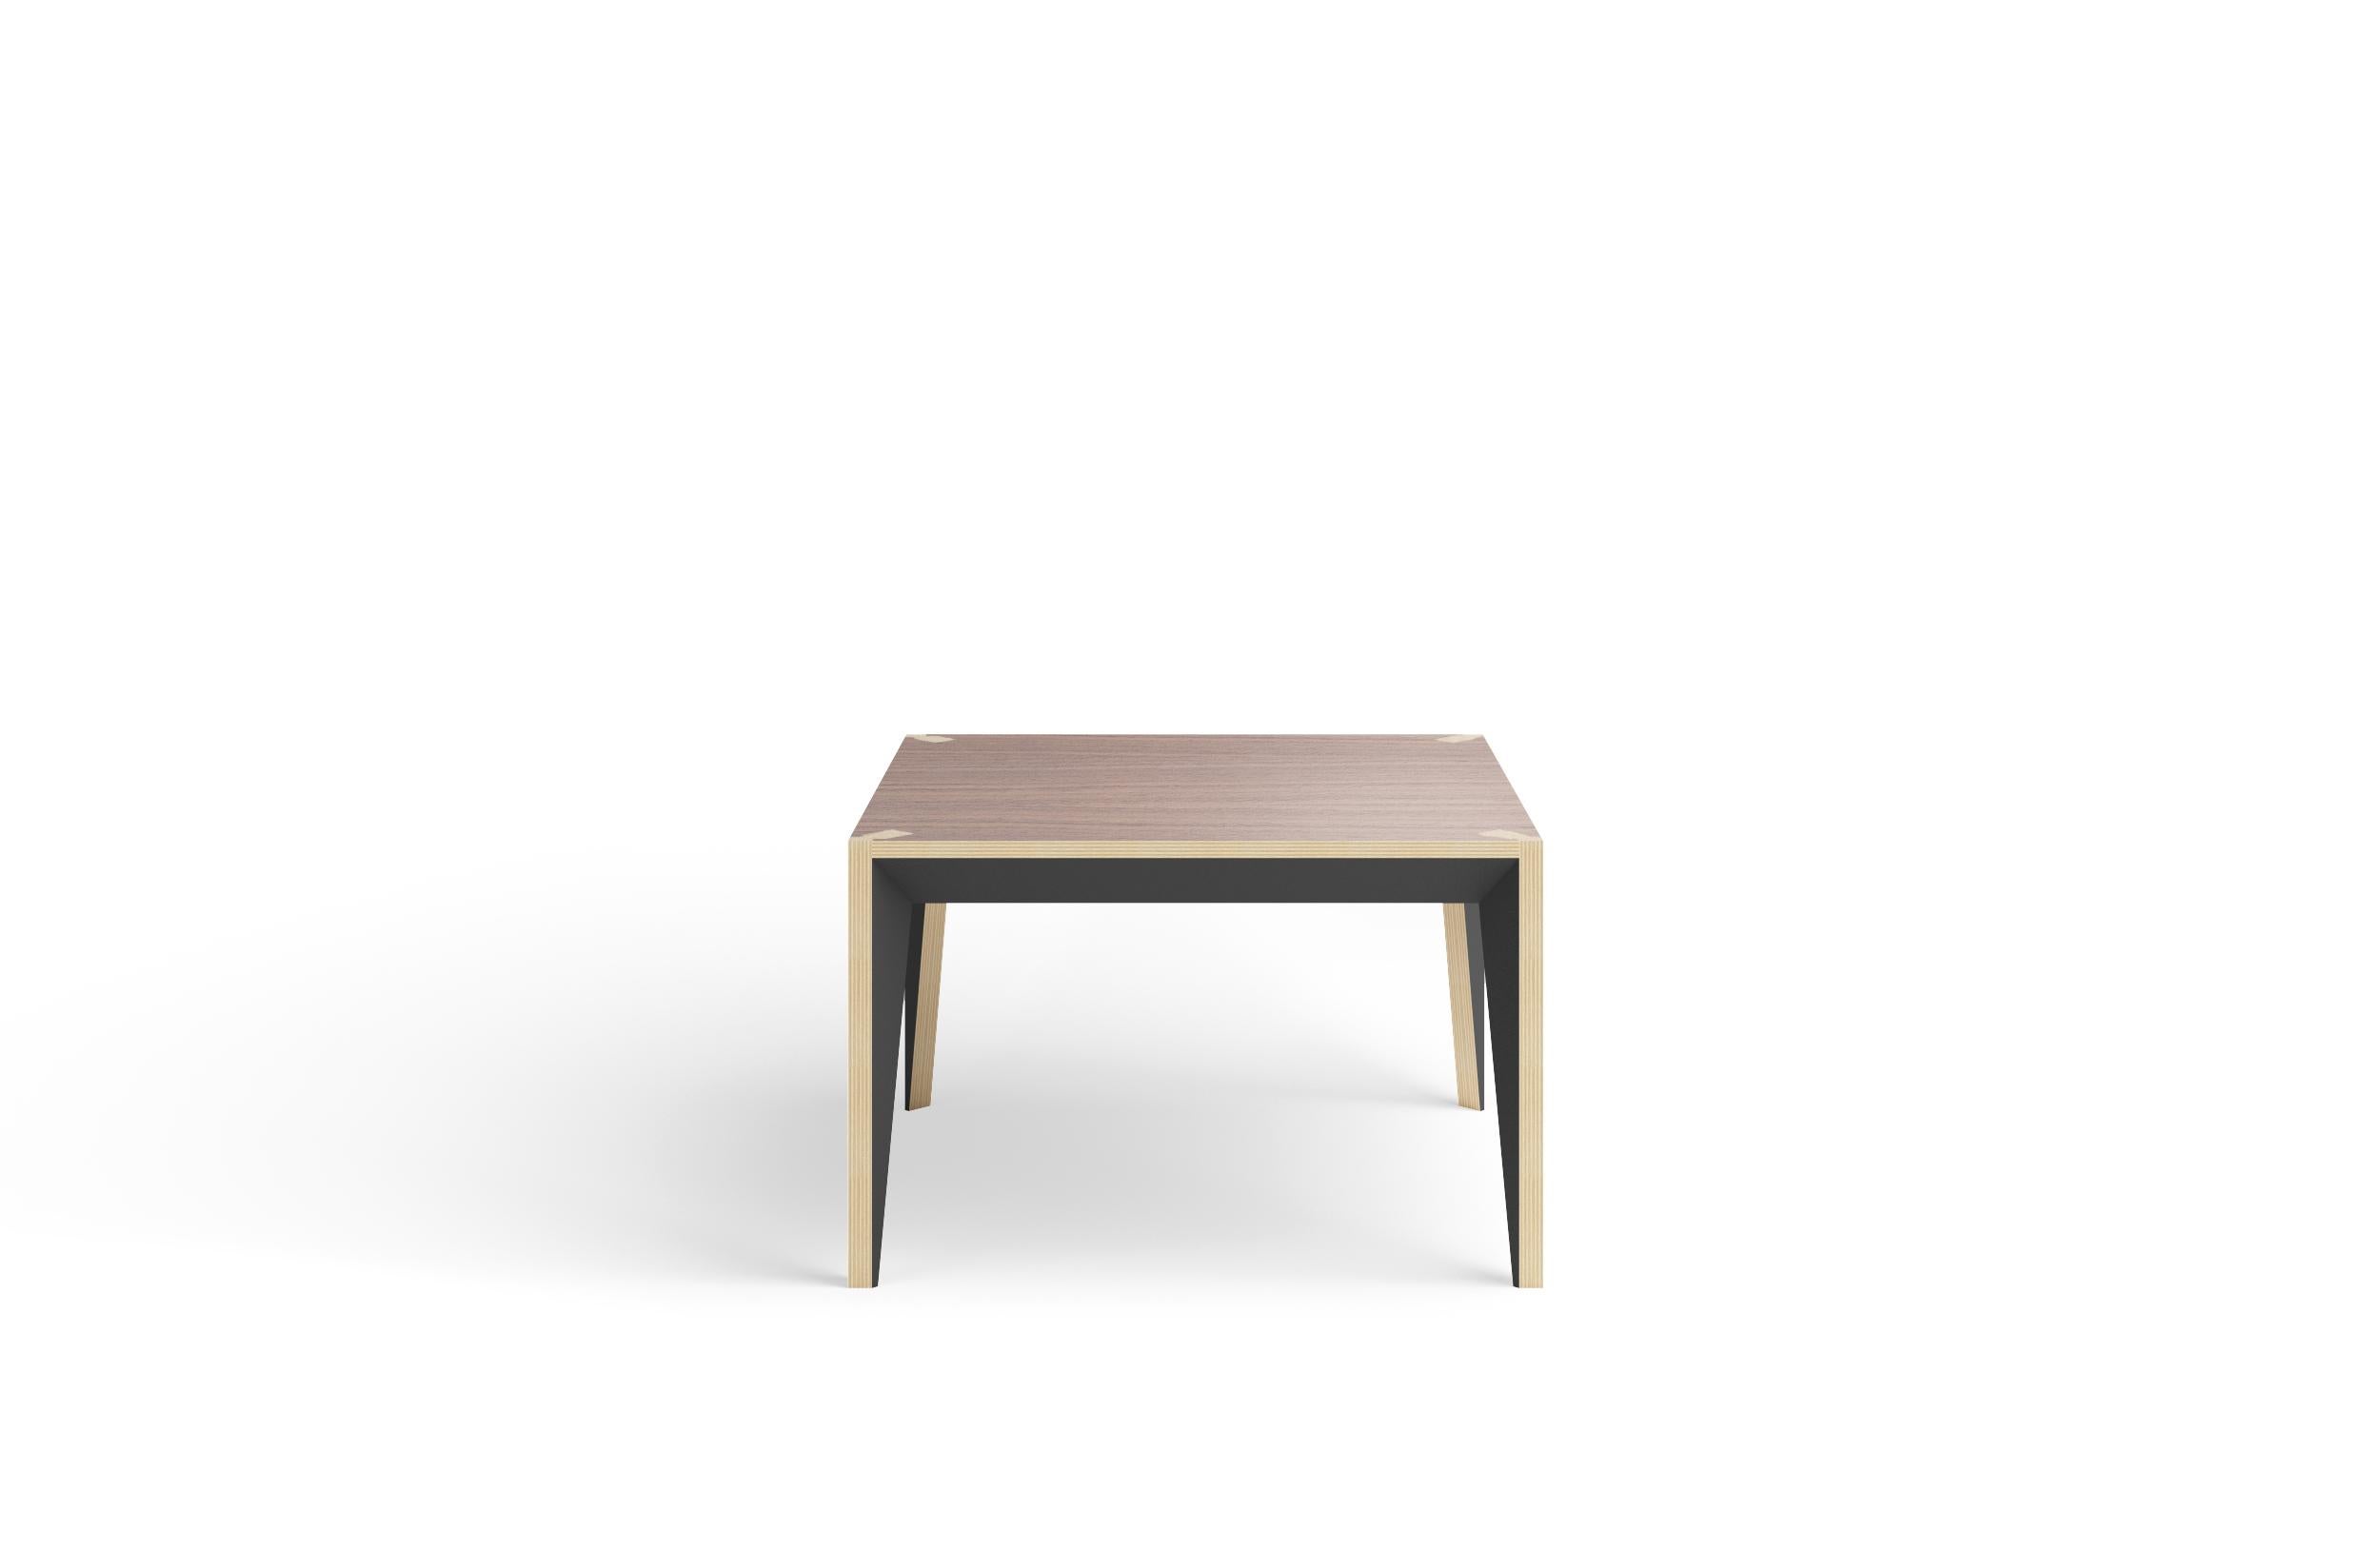 Merging clean lines with warm materials, the faceted geometry of the MiMi square coffee table creates a slender, elegant profile punctuated with painted surfaces that capture light. This handcrafted modern and graceful design looks great from all